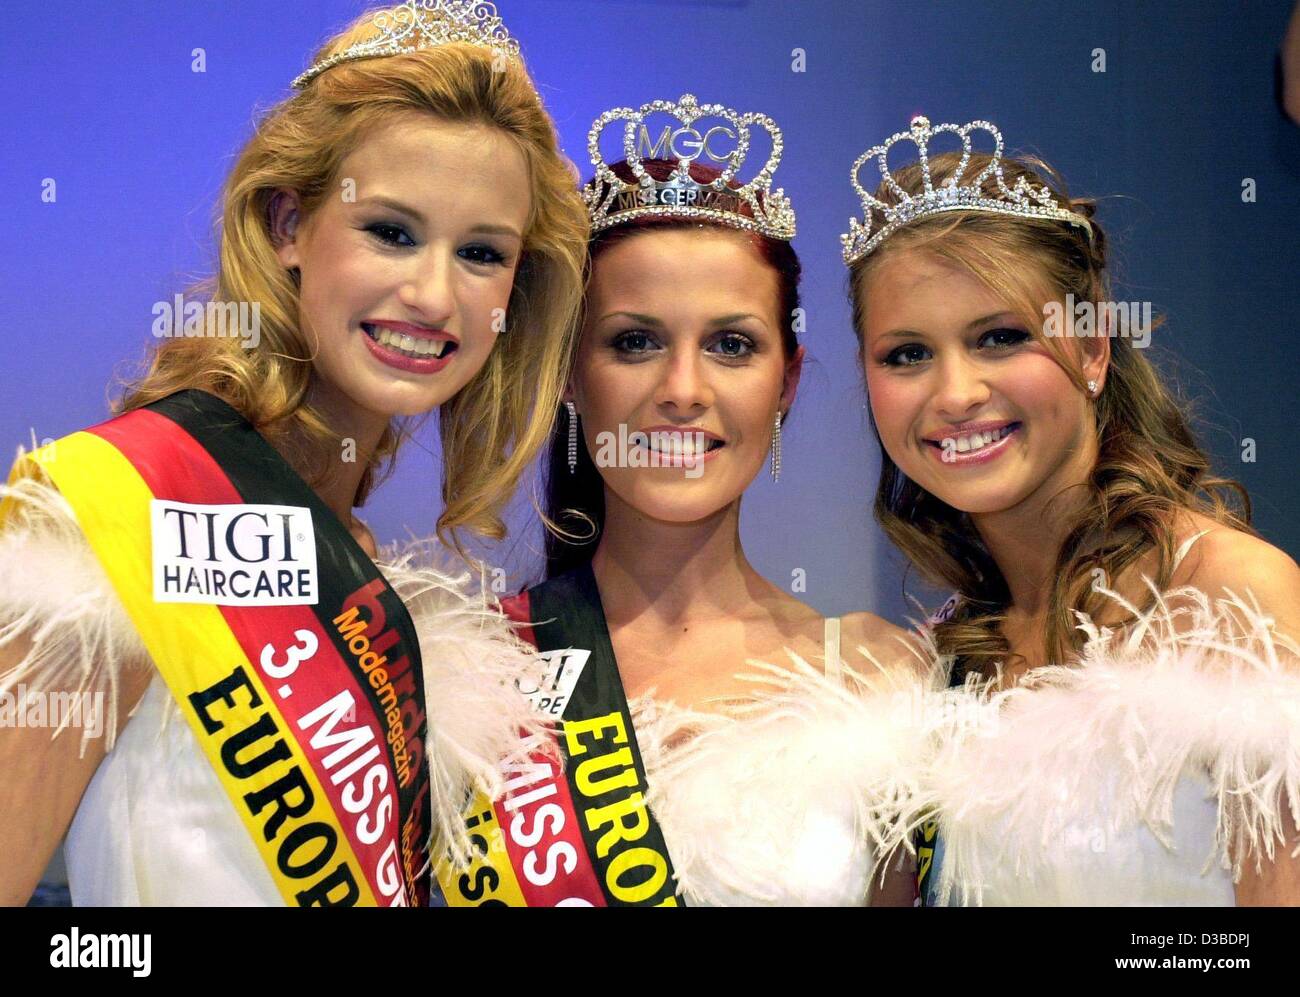 (dpa) - After winning the Miss Germany election 2003, the 24-year-old Babett Konau smiles and stands between second placed Natalia Tropmann (R), lawyer's assistant, and third placed Laura Mueller (L), a student, in Rust, Germany, 25 January 2003. The down to earth dentist's assistant Babett Konau re Stock Photo